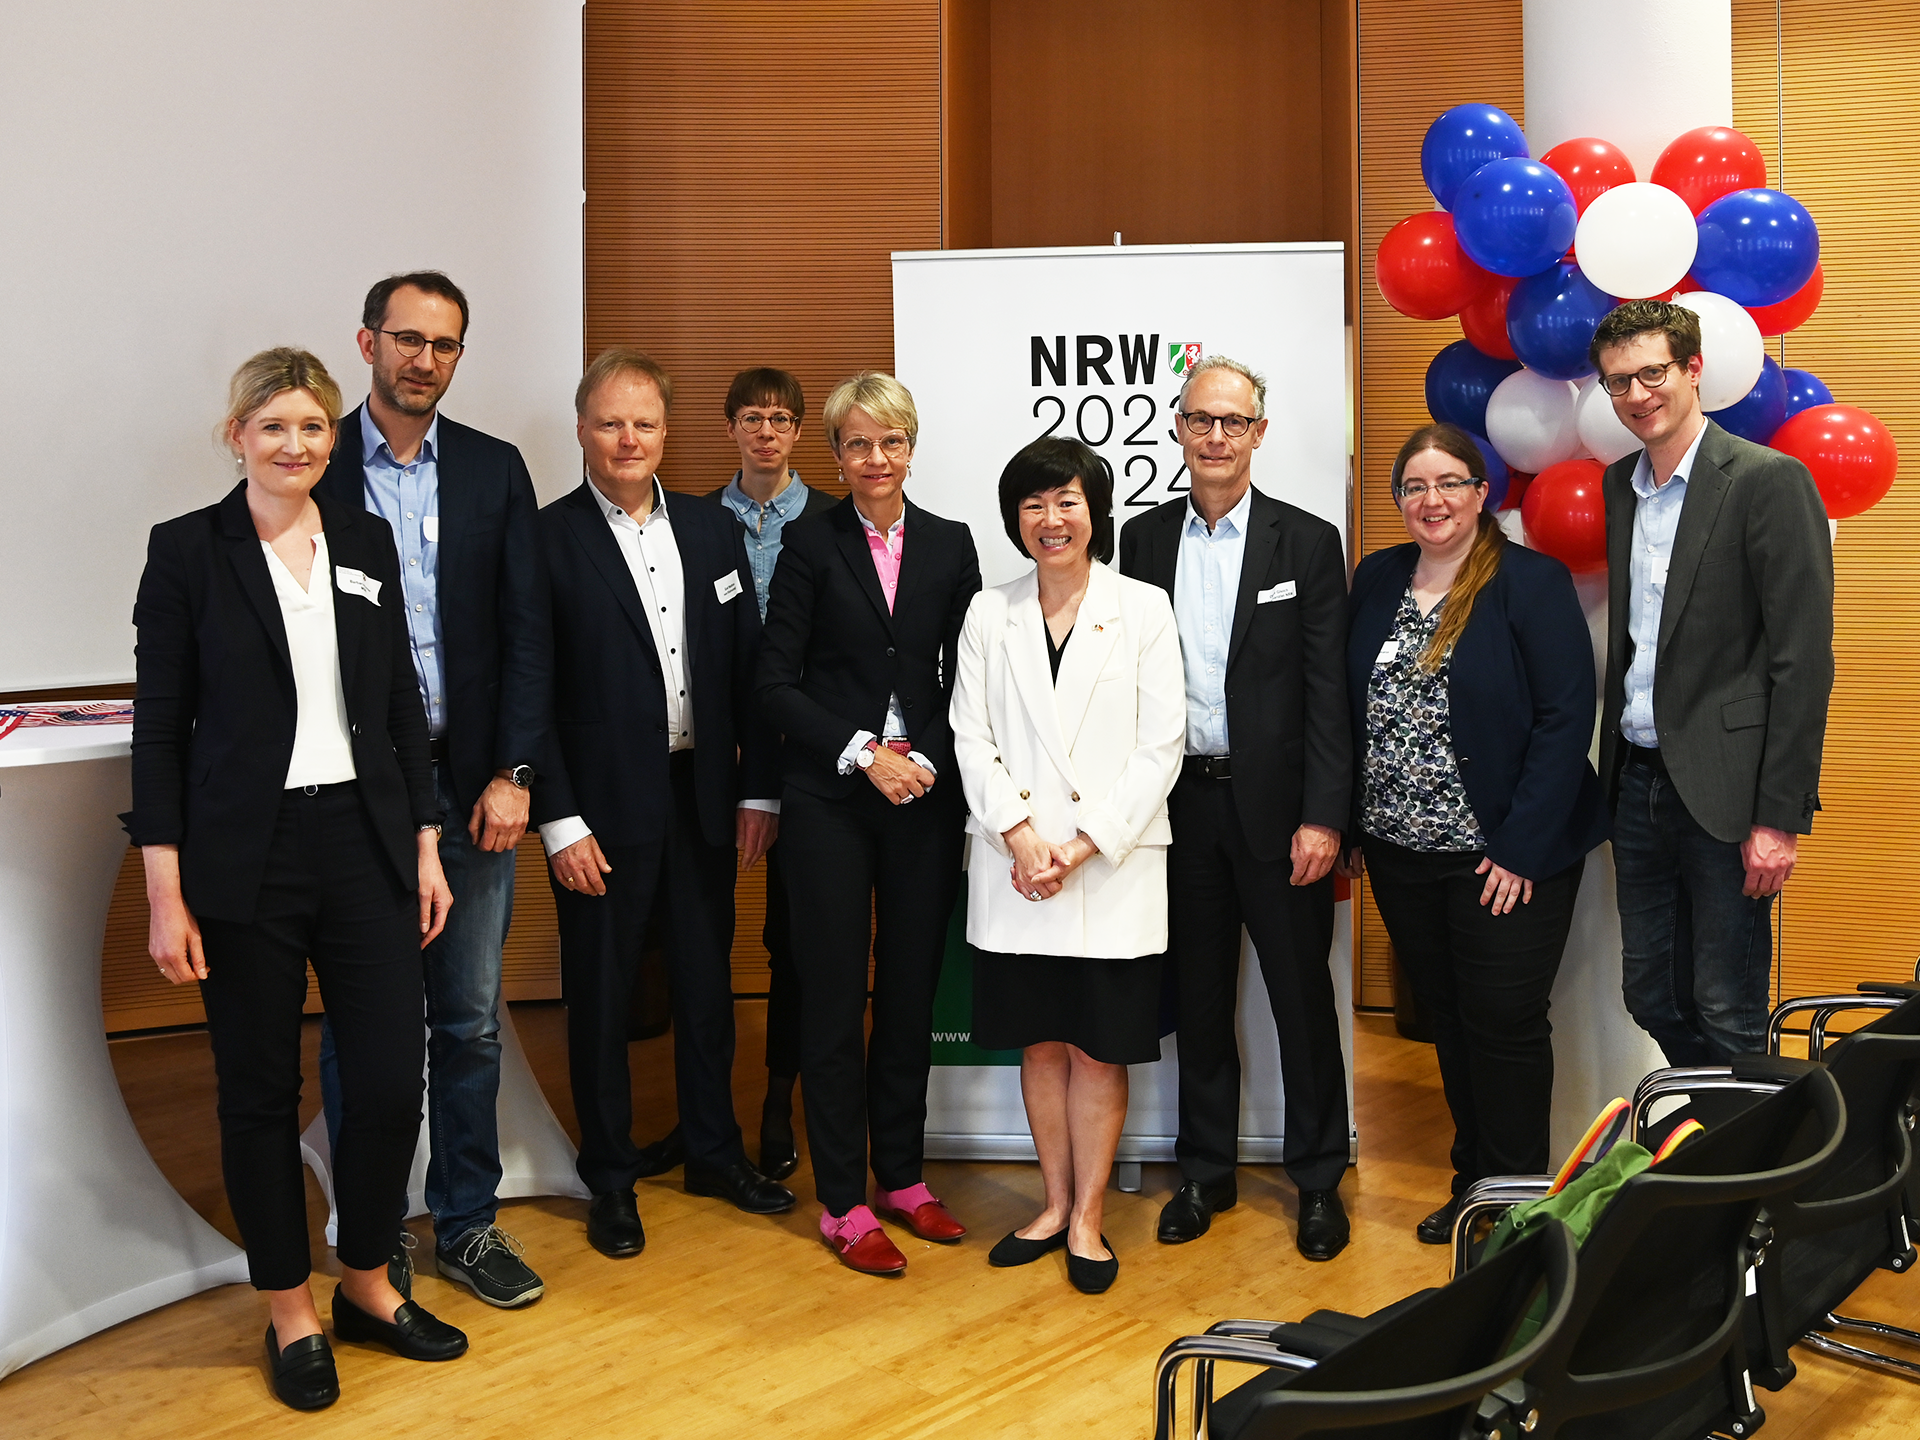 The picture shows a group of people in front of the NRW-USA Year logo.